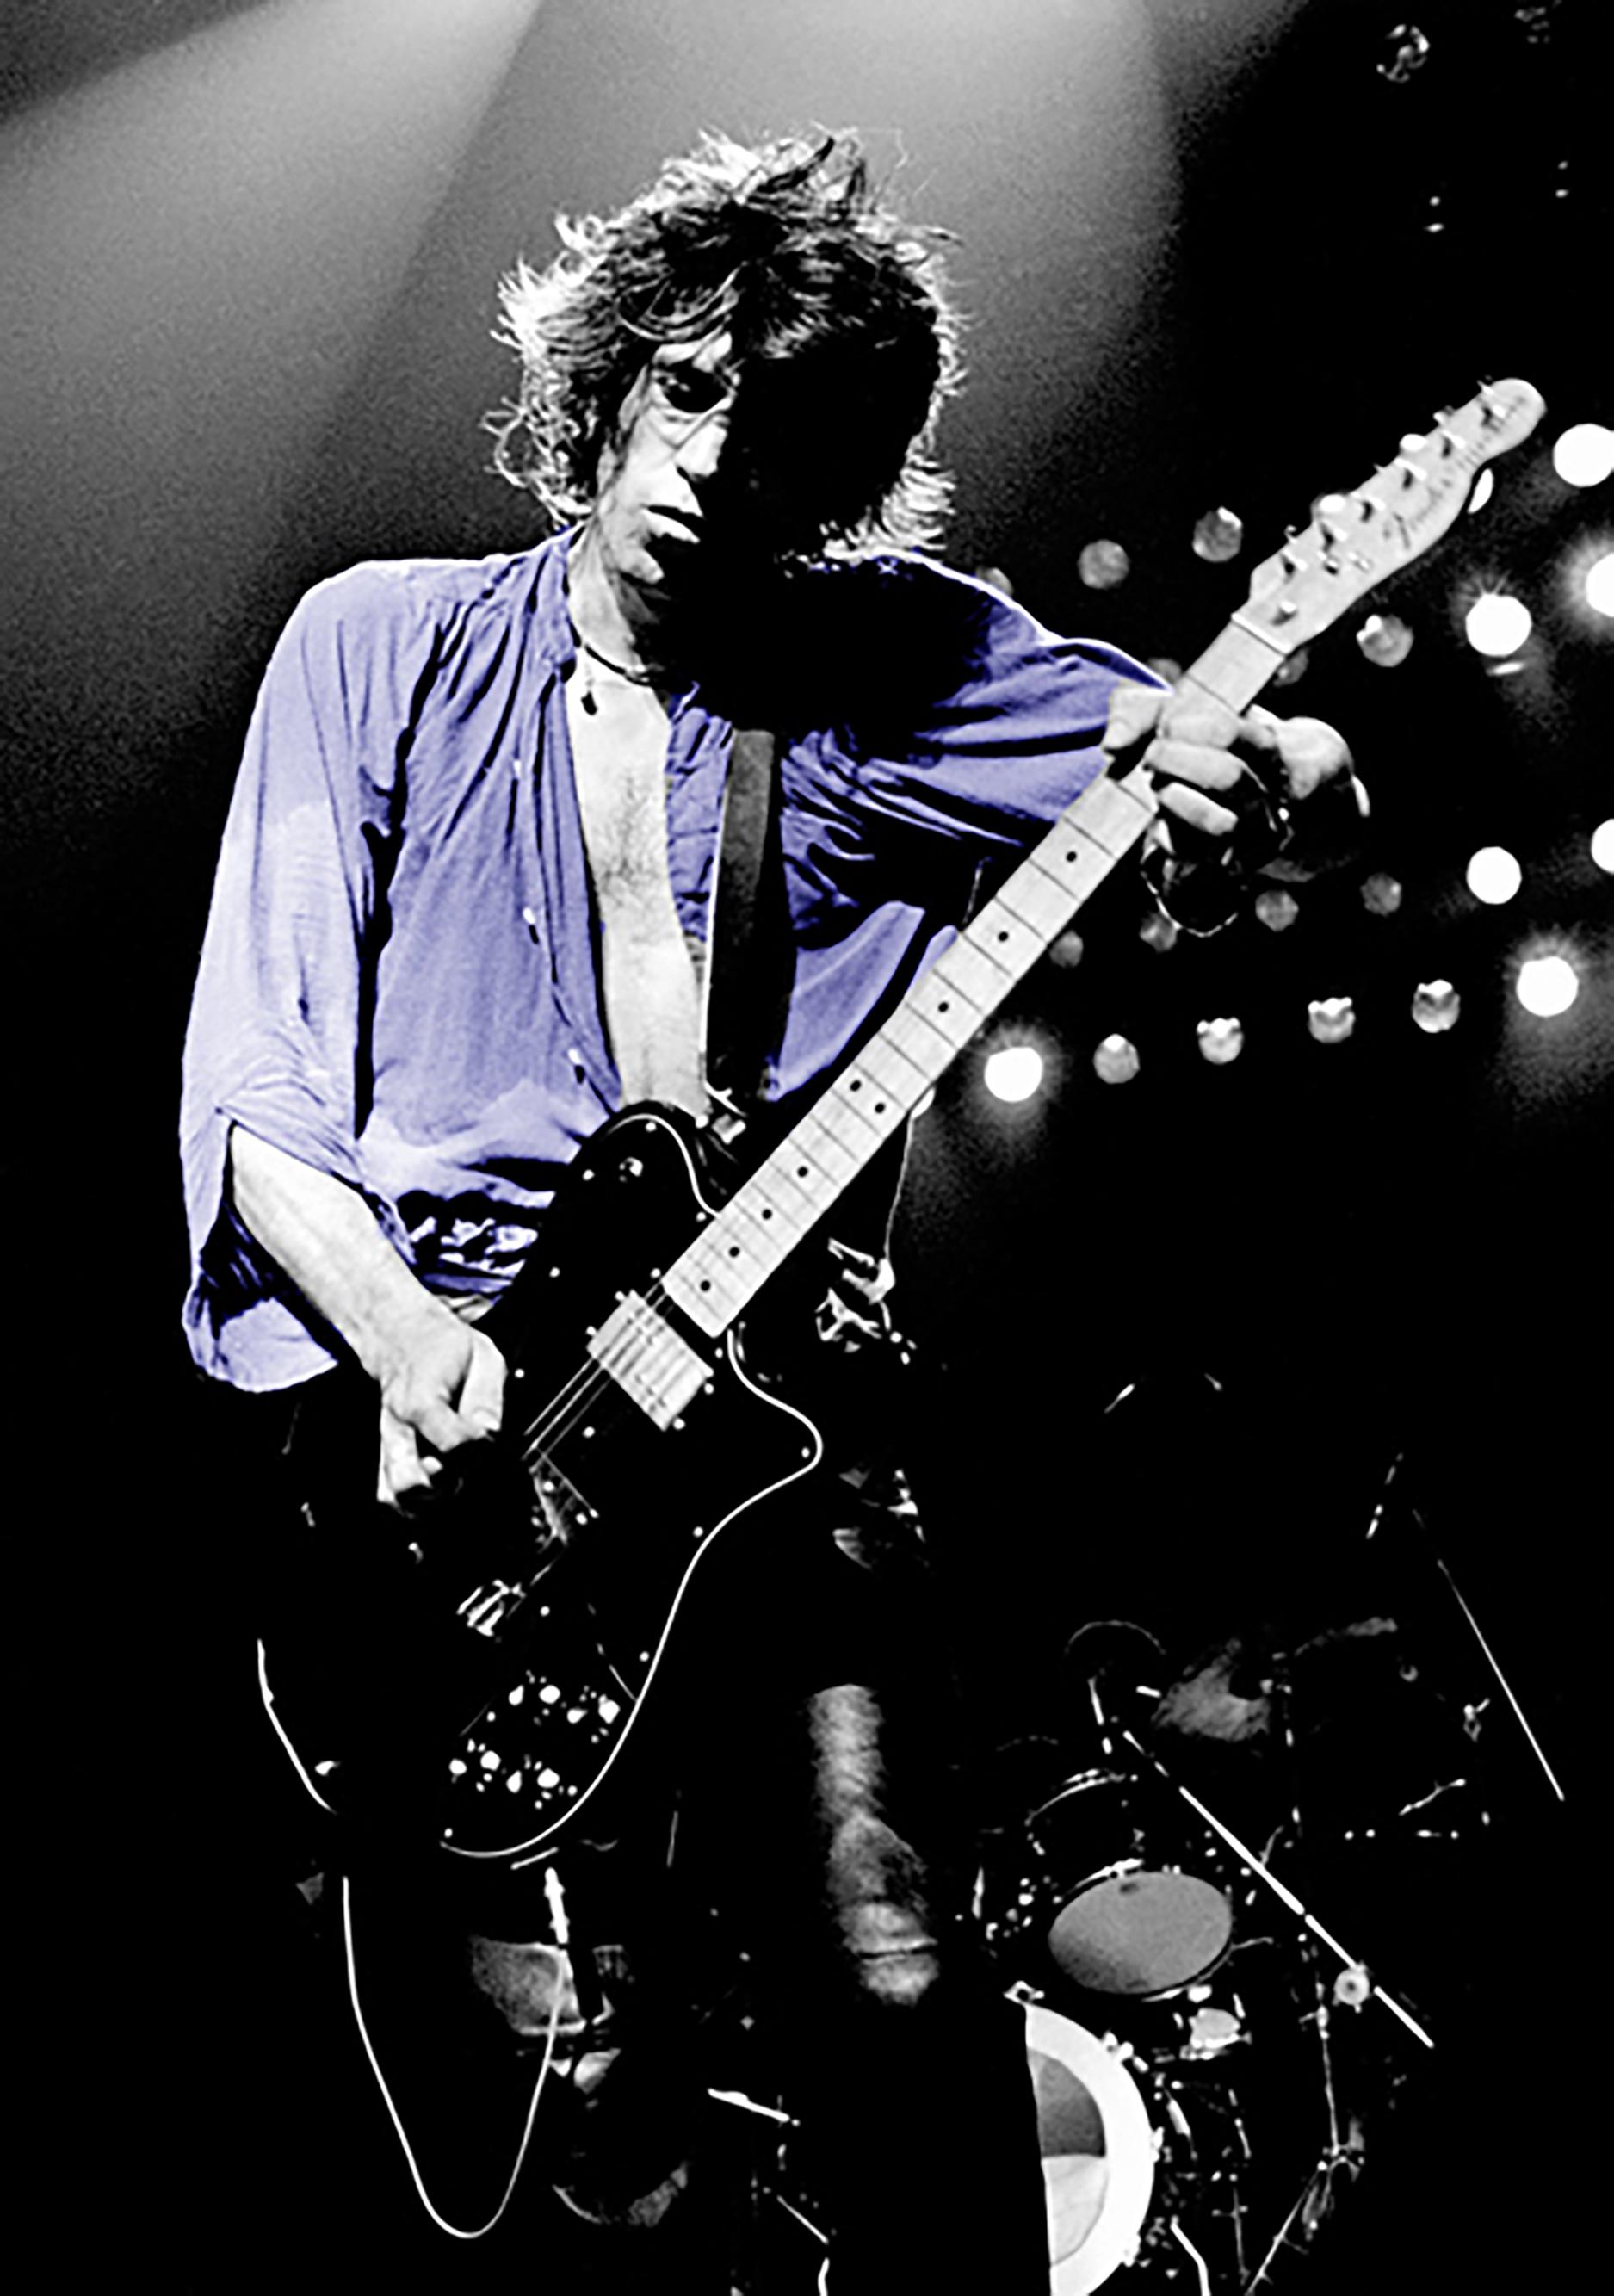 Richard E. Aaron Color Photograph - Keith Richards - 1978 Colorized Concert Shirt on Hahnemuehle Paper